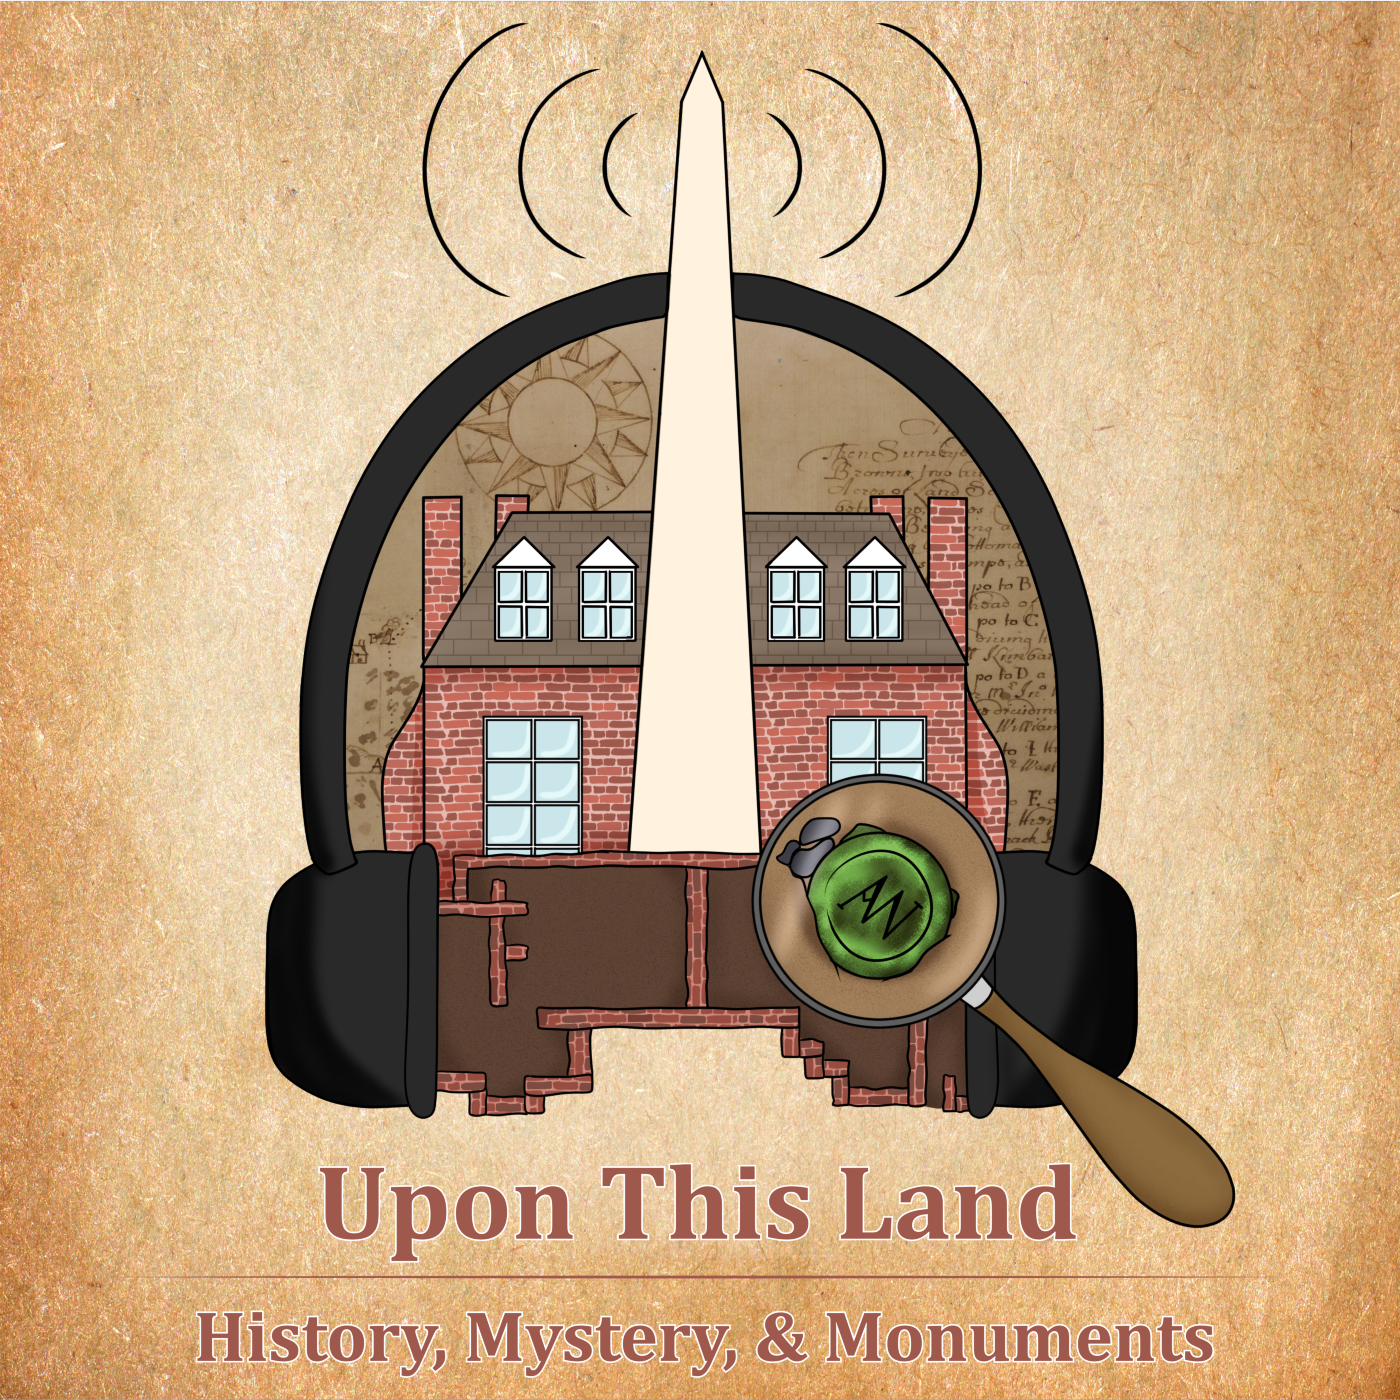 Graphic containing headphones, house, monument, magnify glass, and brick foundation